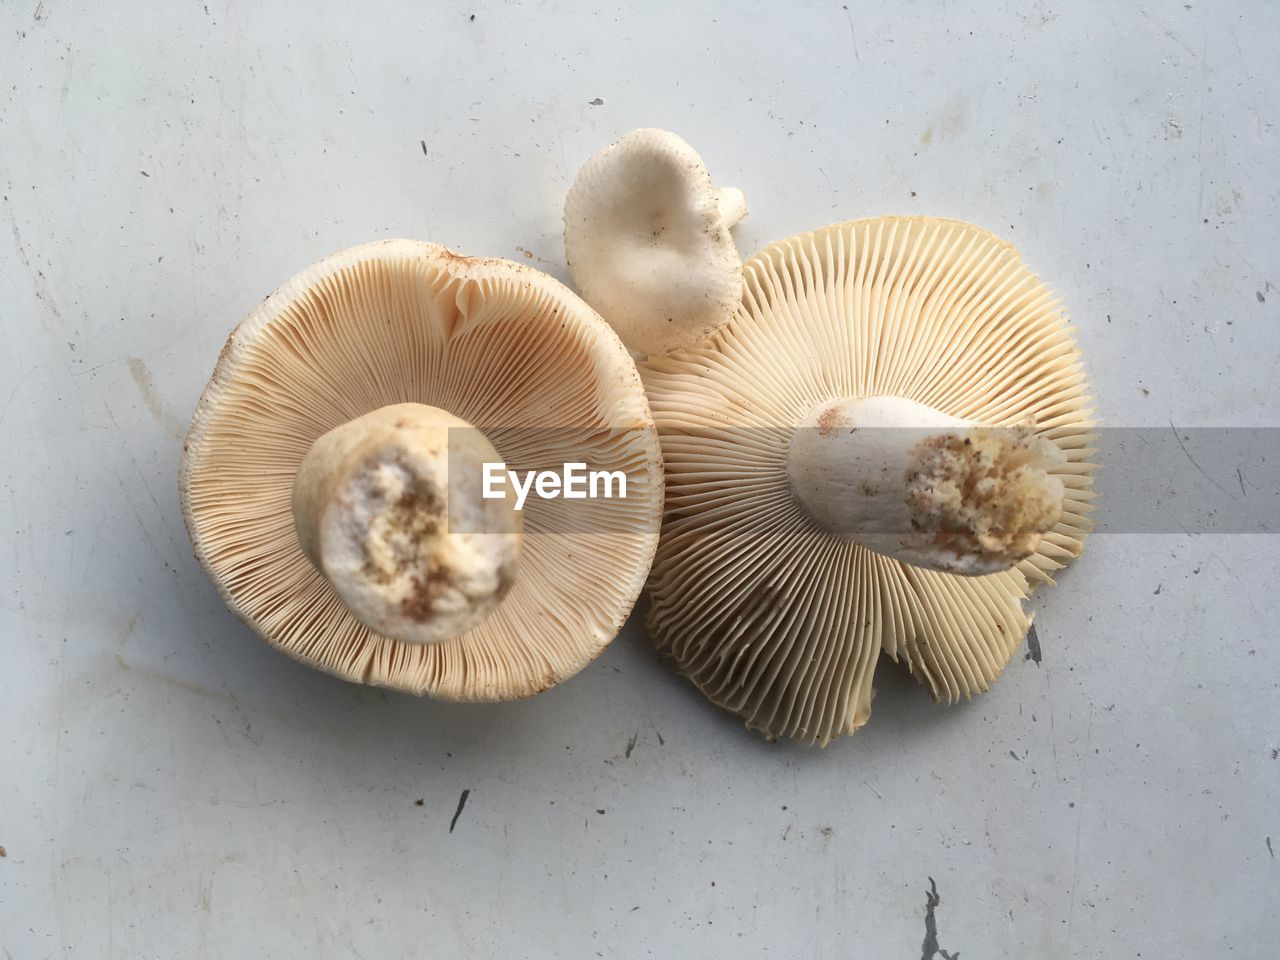 HIGH ANGLE VIEW OF MUSHROOMS IN PLATE